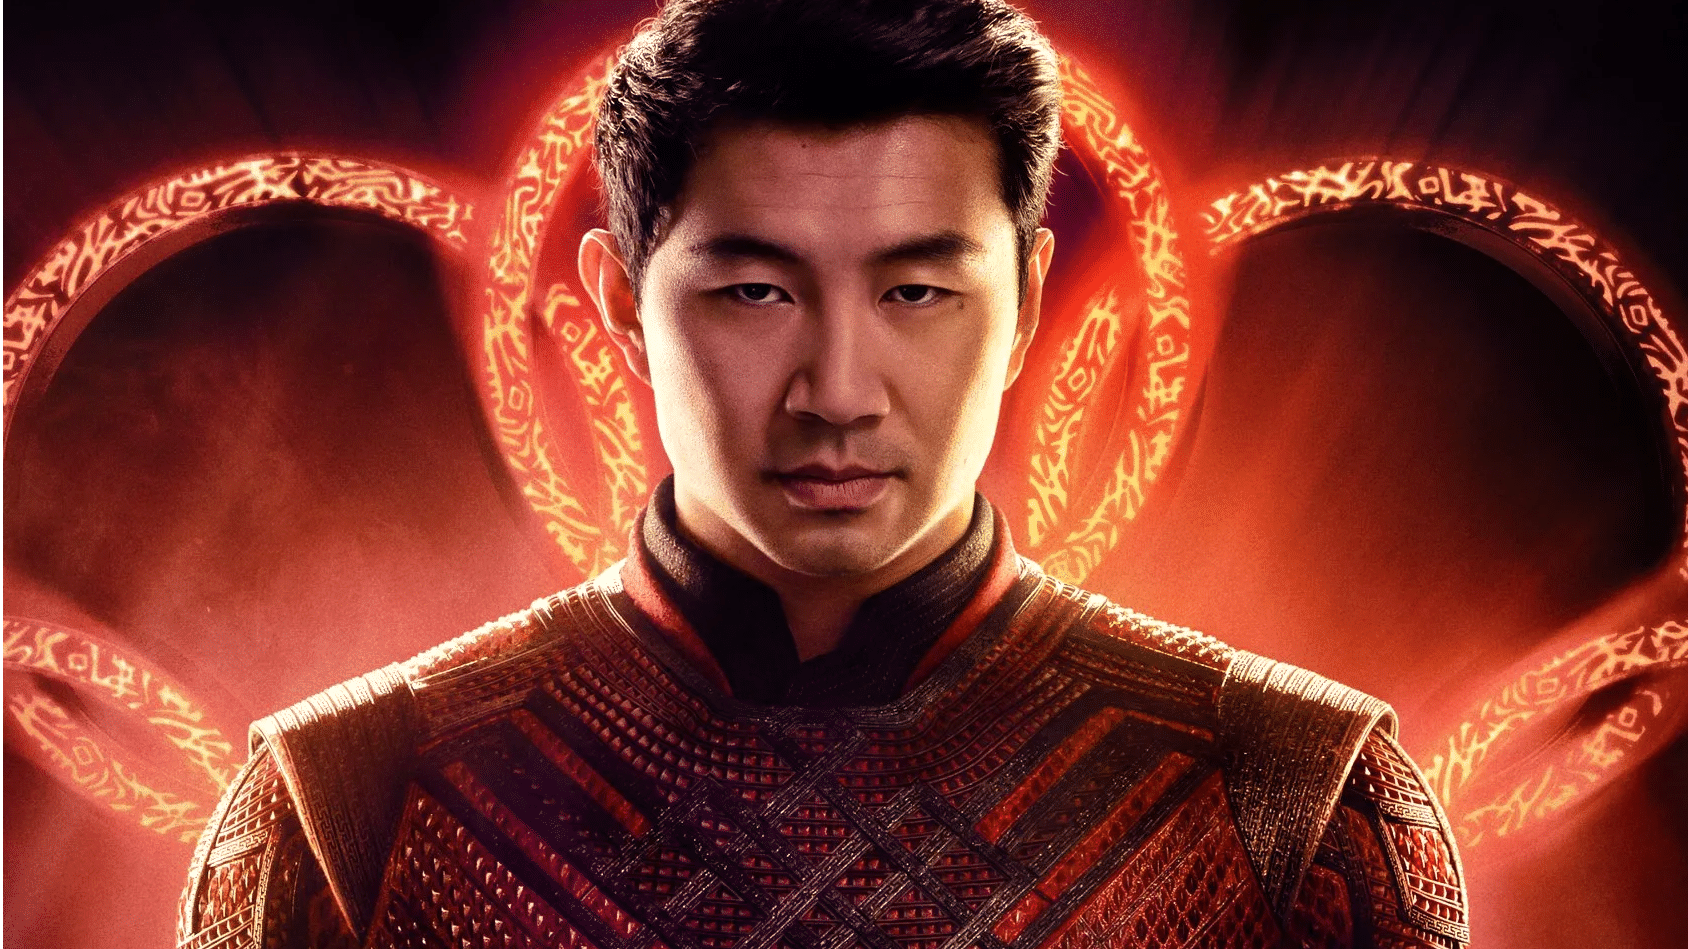 Watch | Teaser of Marvel’s ‘Shang-Chi and the Legend of the Ten Rings’